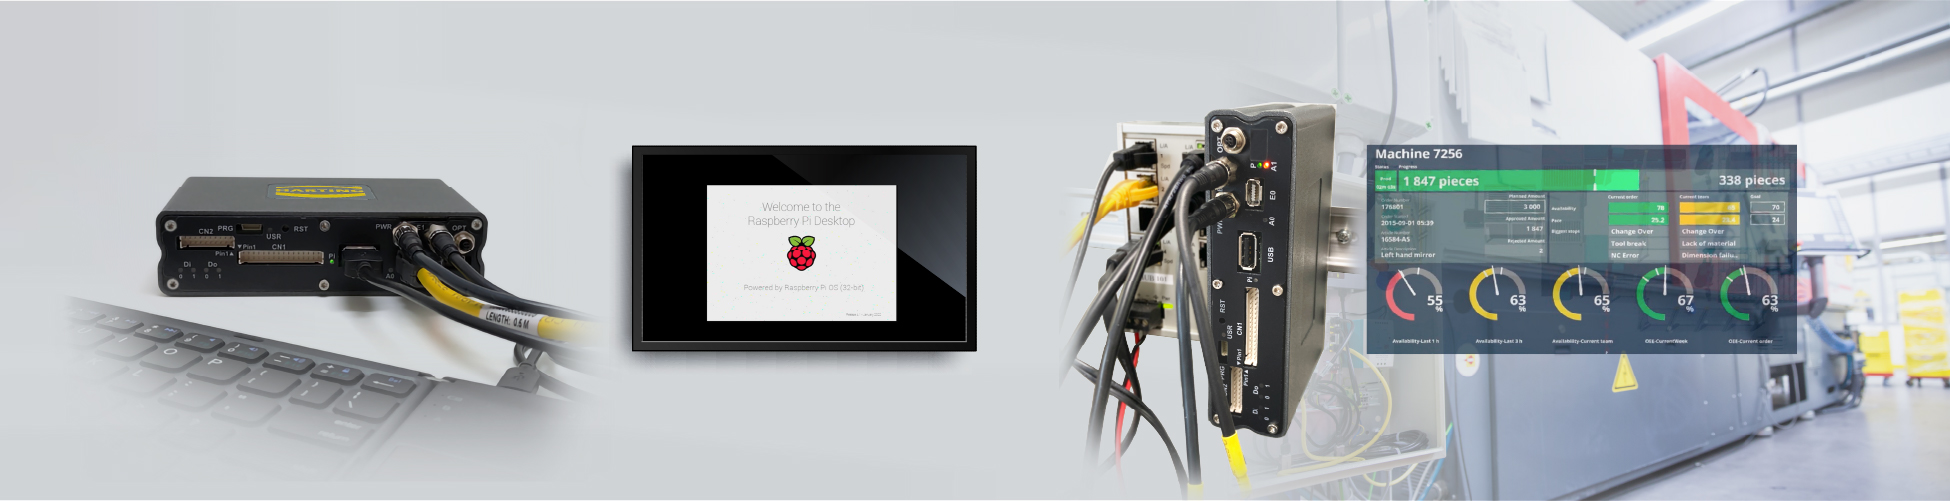 MICA-R4 – Industrial Raspberry Pi with CM4